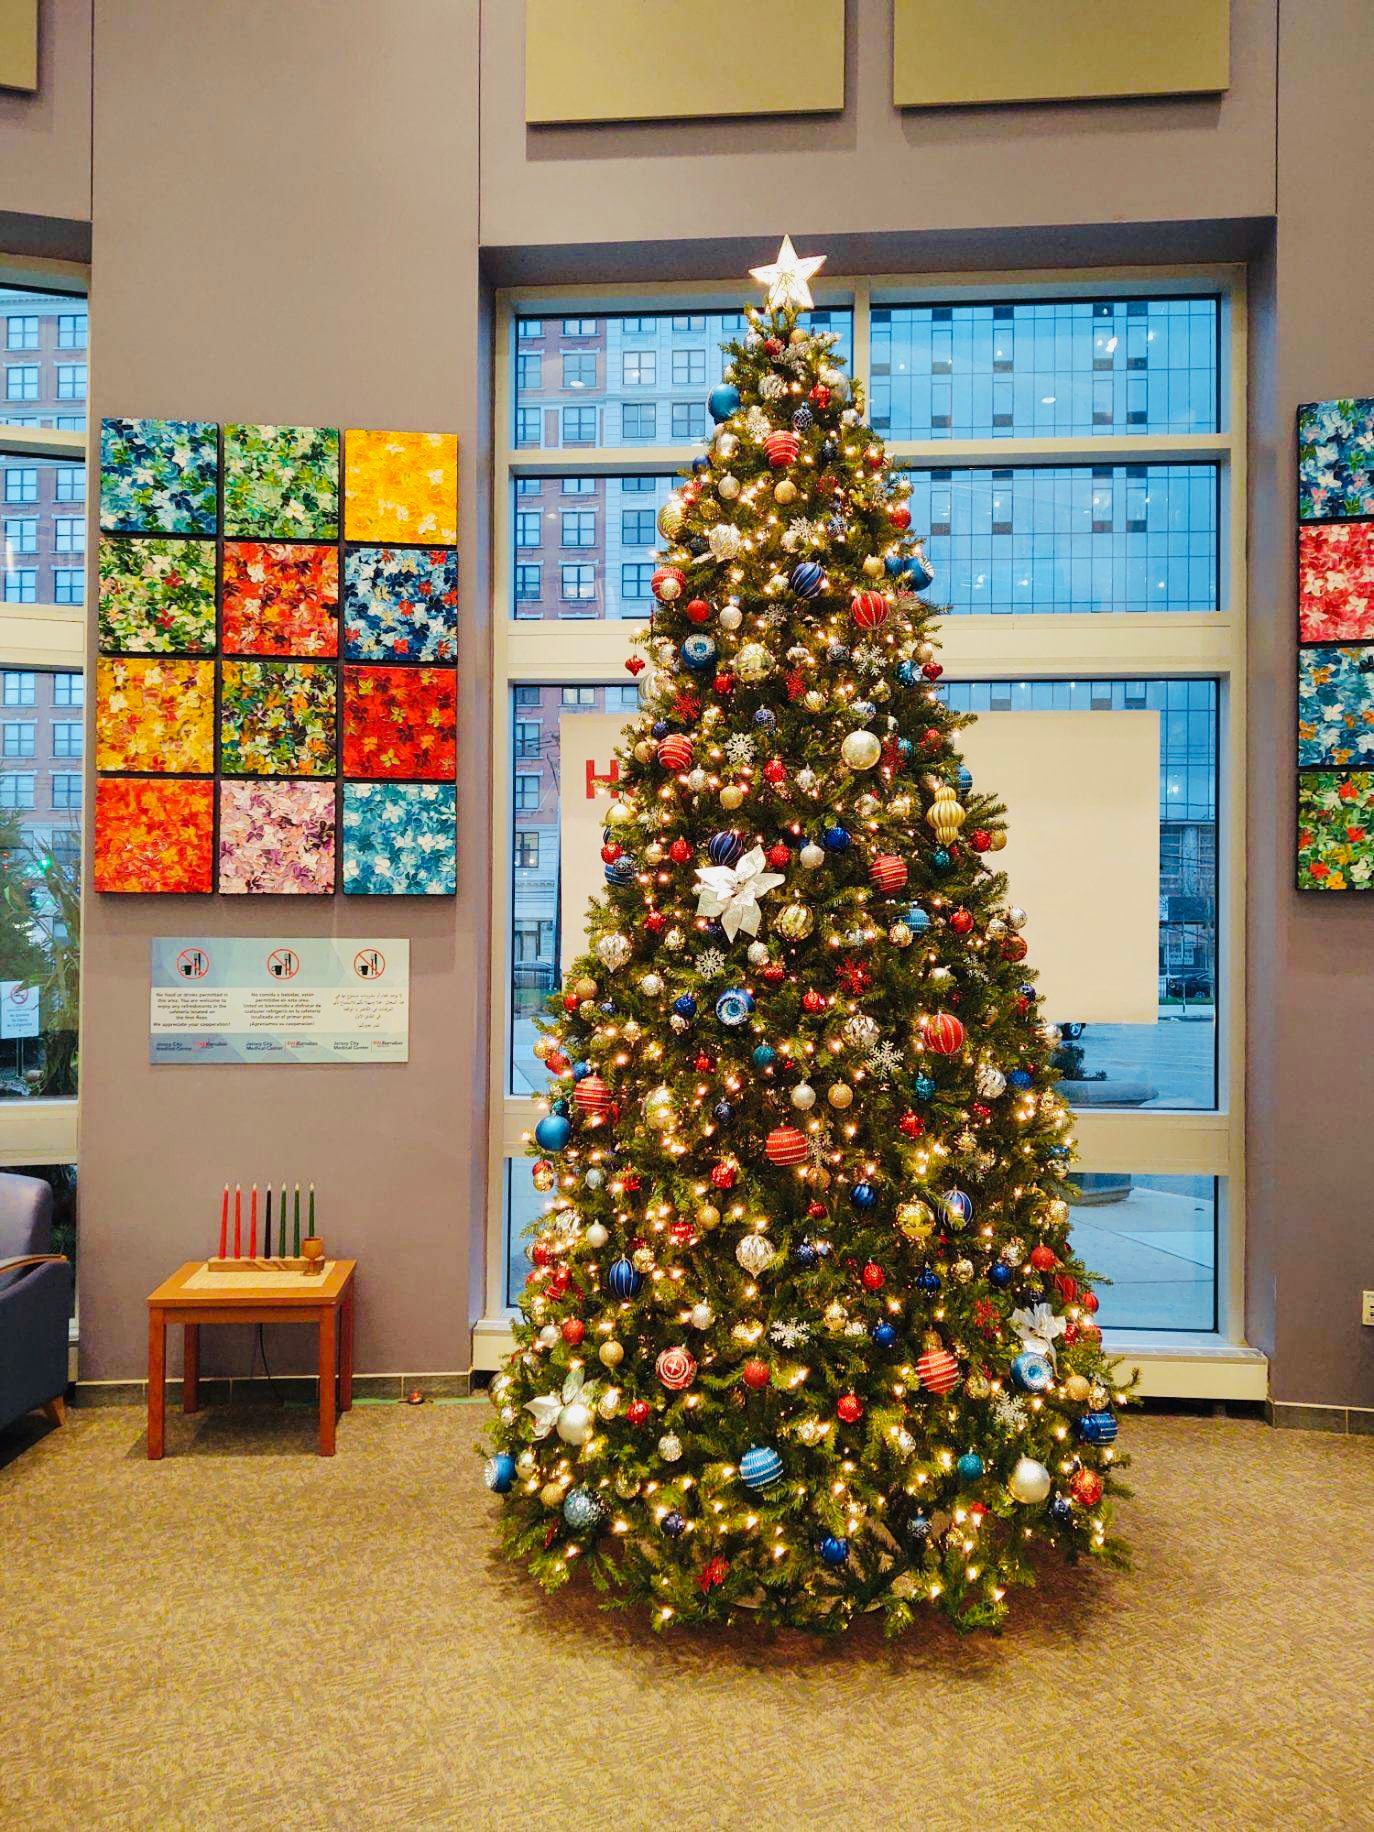 A decorated Christmas tree in a hospital lobby